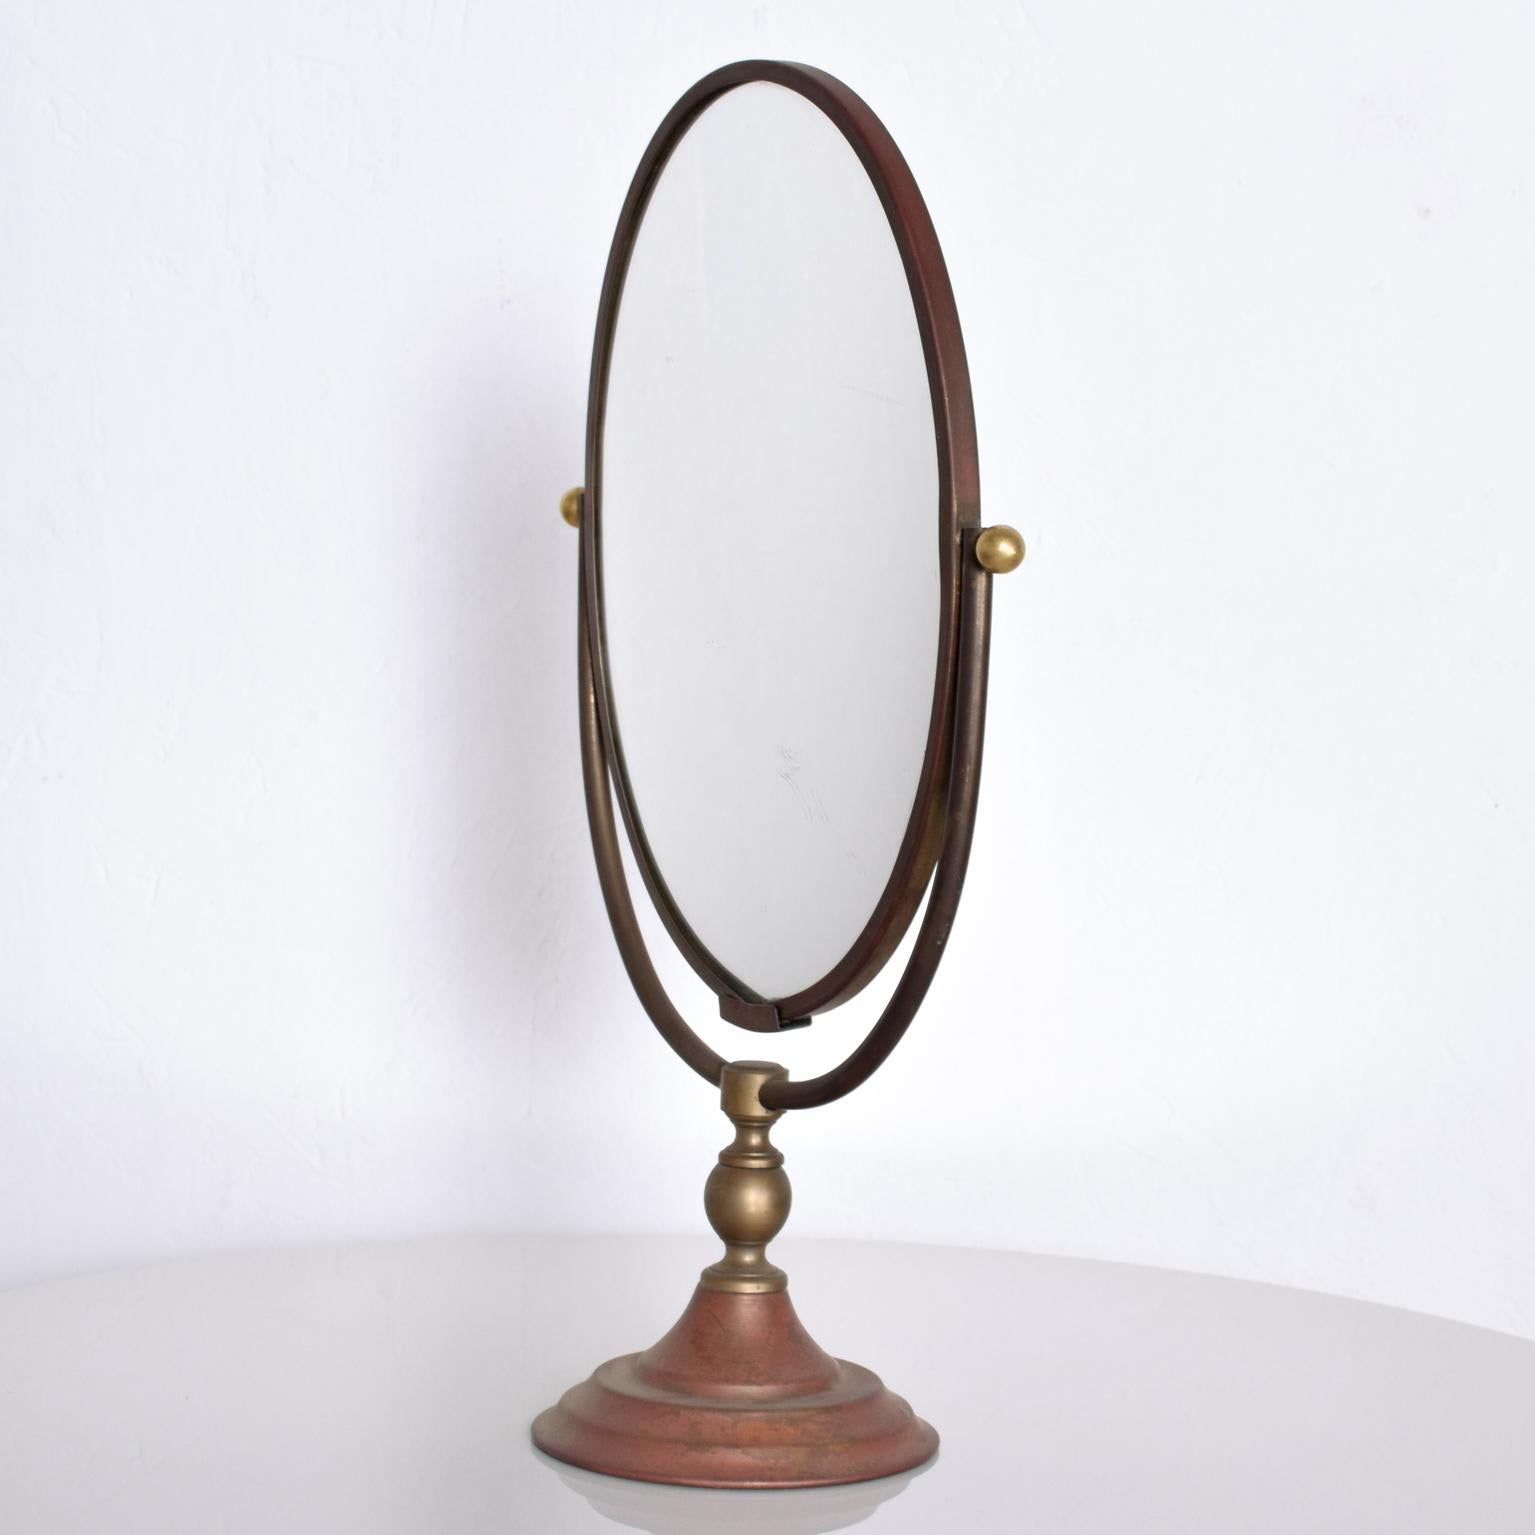 We are pleased to offer: an elegant Vintage Modern Vanity Standing Table Mirror After Gio Ponti, Italy. One-sided mirror with soft backside in an Oval Shape. Ref# MIRRGM12120202 Dimensions are: 15 1/4